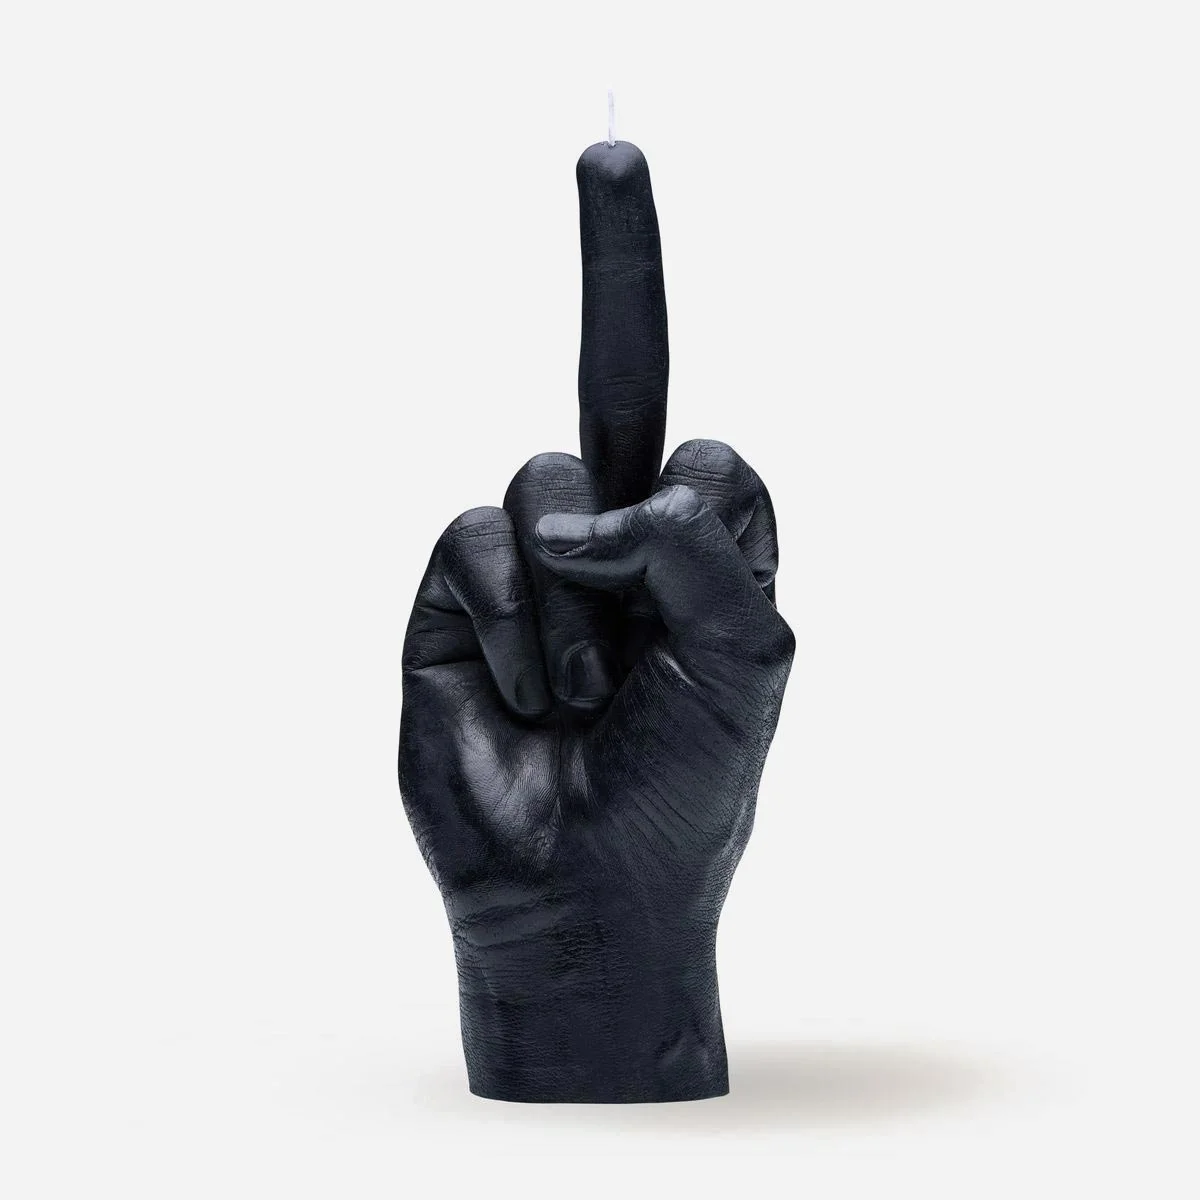 Candlehand F*ck You Gesture Candle - Black